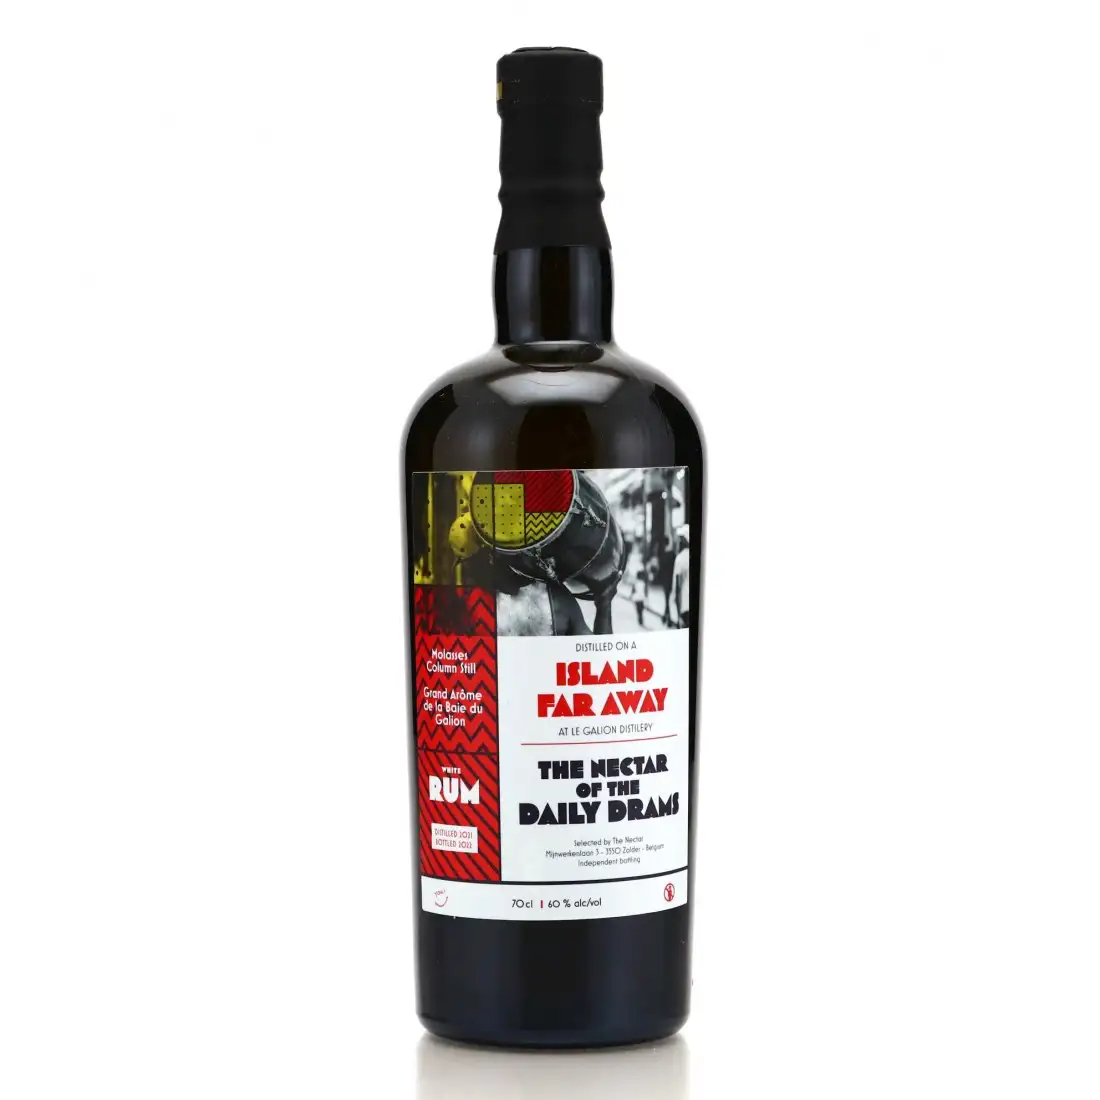 Image of the front of the bottle of the rum The Nectar Of The Daily Drams Grand Arôme